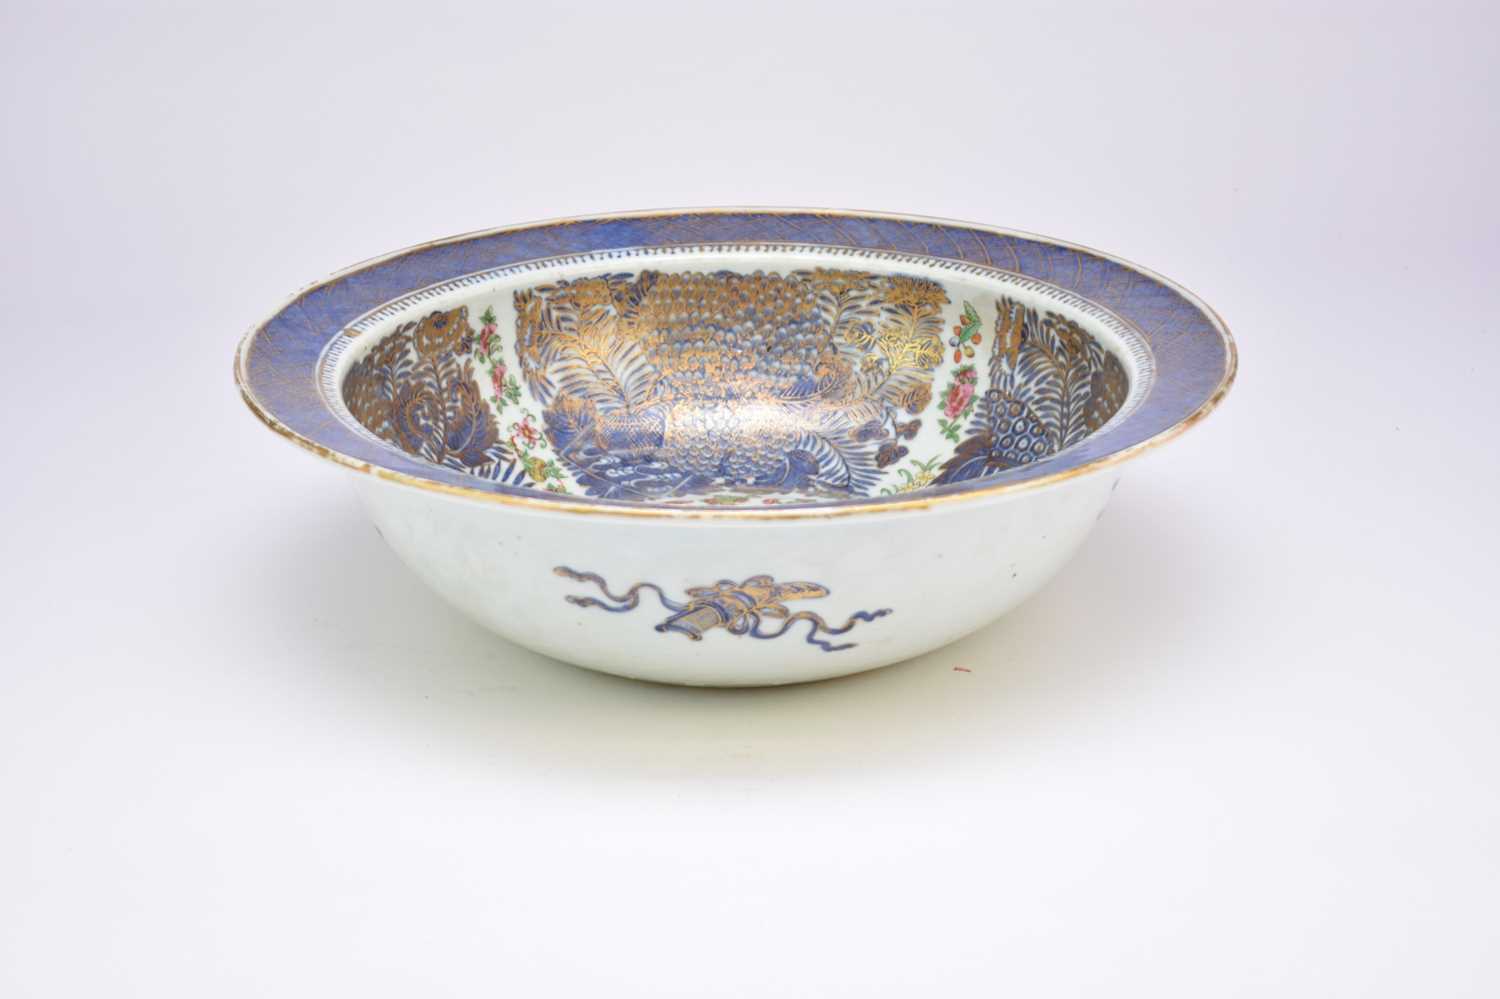 A Chinese export enamelled blue and white punch bowl, 18th century - Image 2 of 7